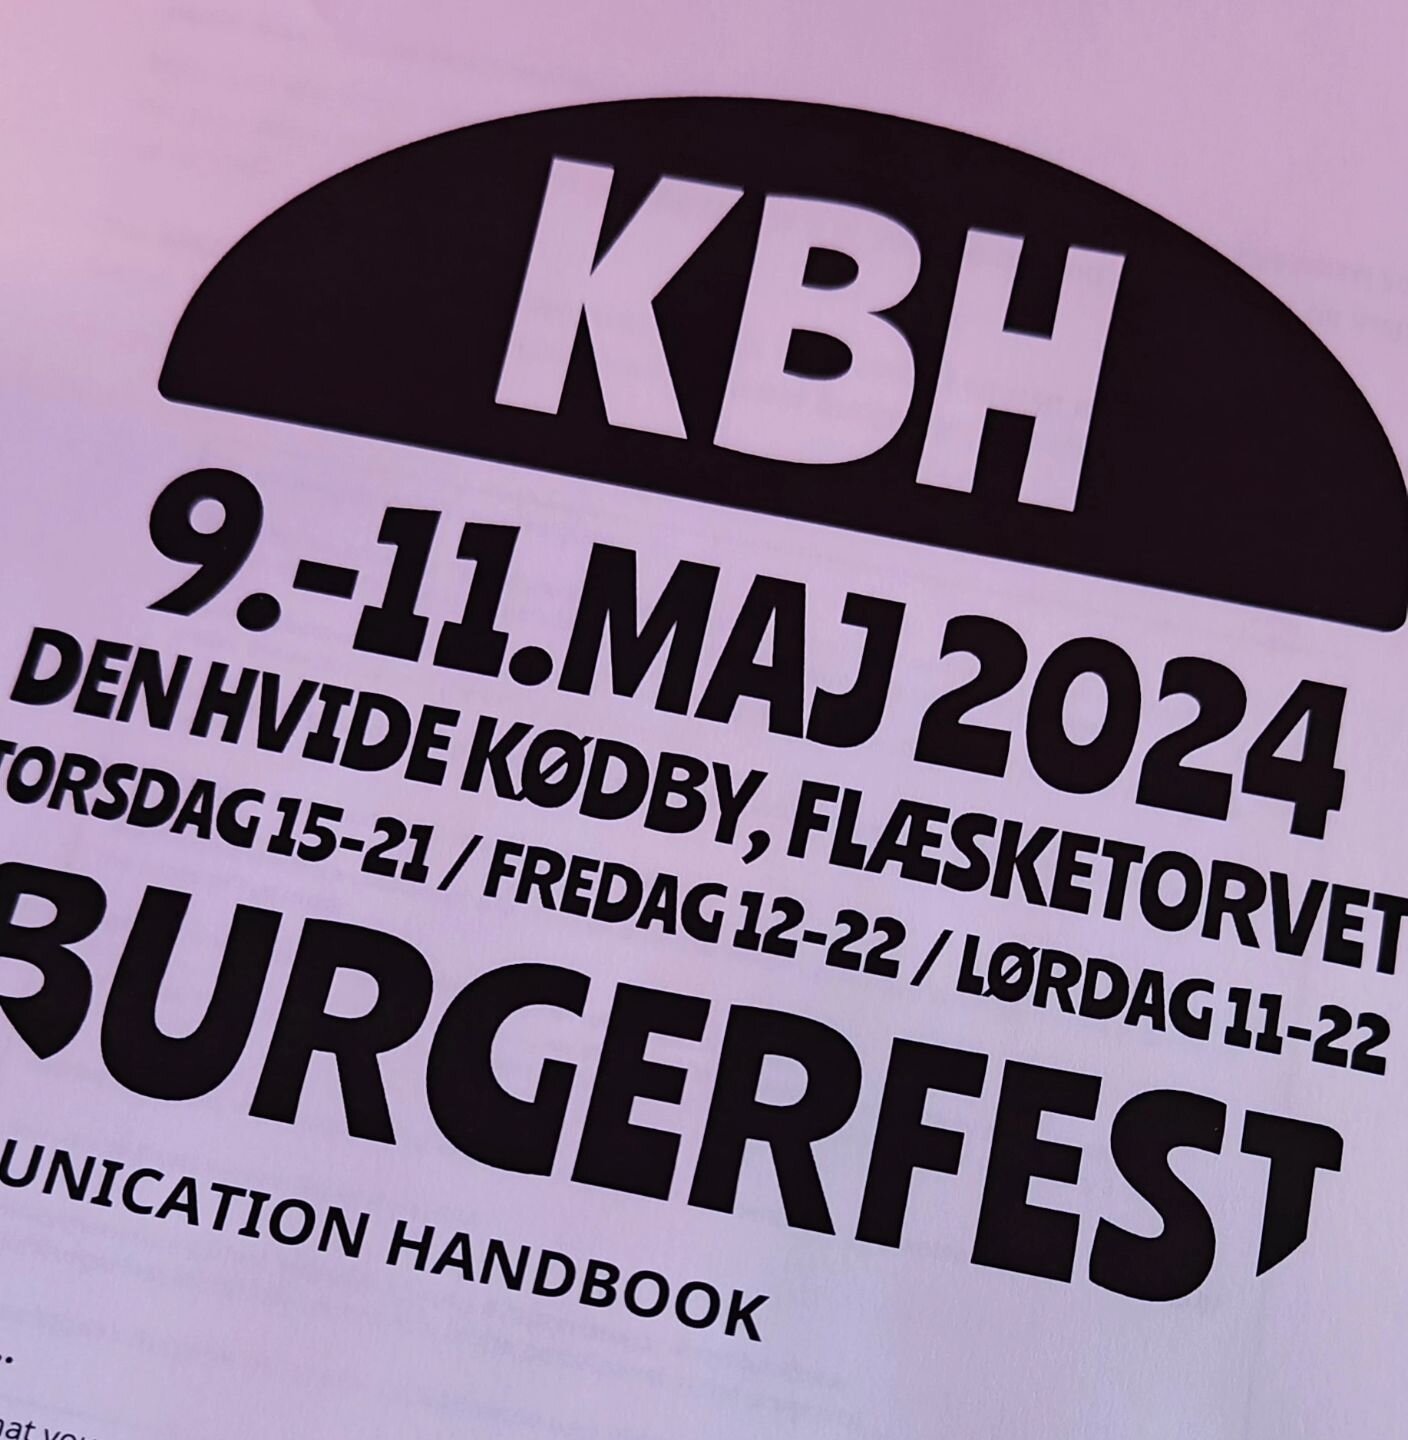 @sidechickcph are really excited to be taking part in @kbhburgerfest this year where we take over den hvid k&oslash;dby at Fl&aelig;sketorvet. (Meat packing district)

We will be serving a limited edition- pop-up (halal) fried chicken burger in conju